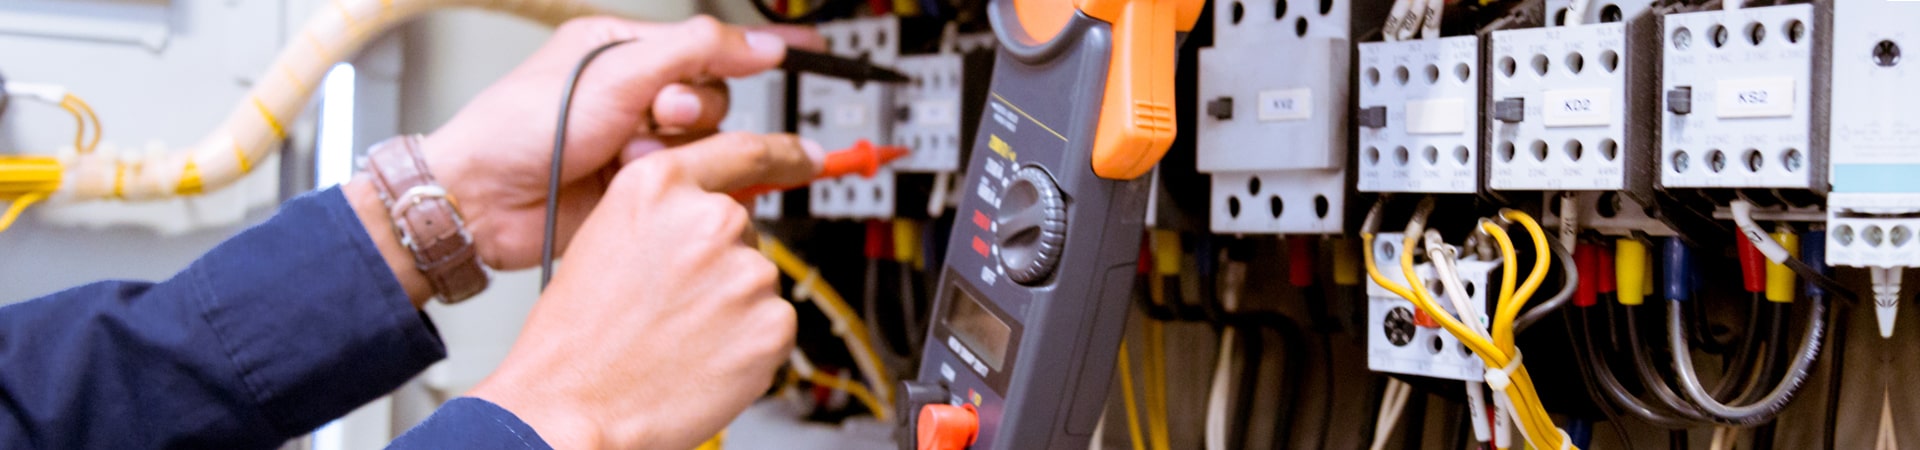 Residential and Commercial Electrical Contractor in Delhi NCR